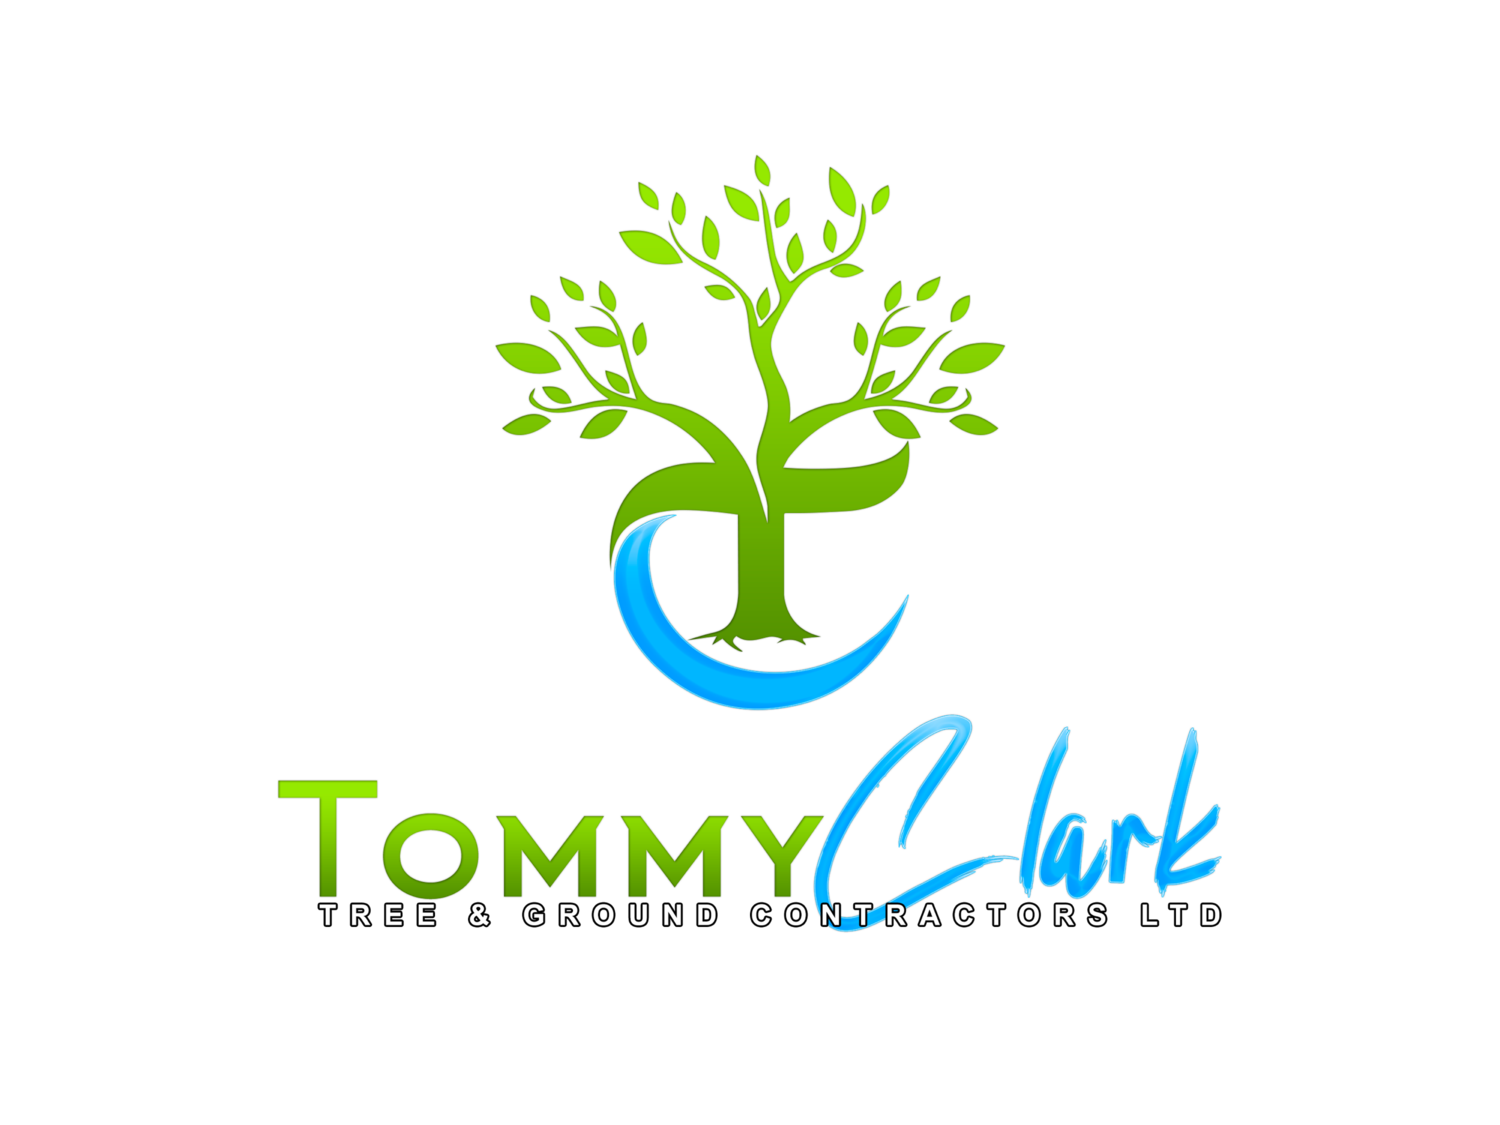 Tommy Clark Tree &amp; Ground Contractors - Tree Surgeons Kent, Tree Services Bexley, Grounds Maintenance Kent, Domestic &amp; Commercial